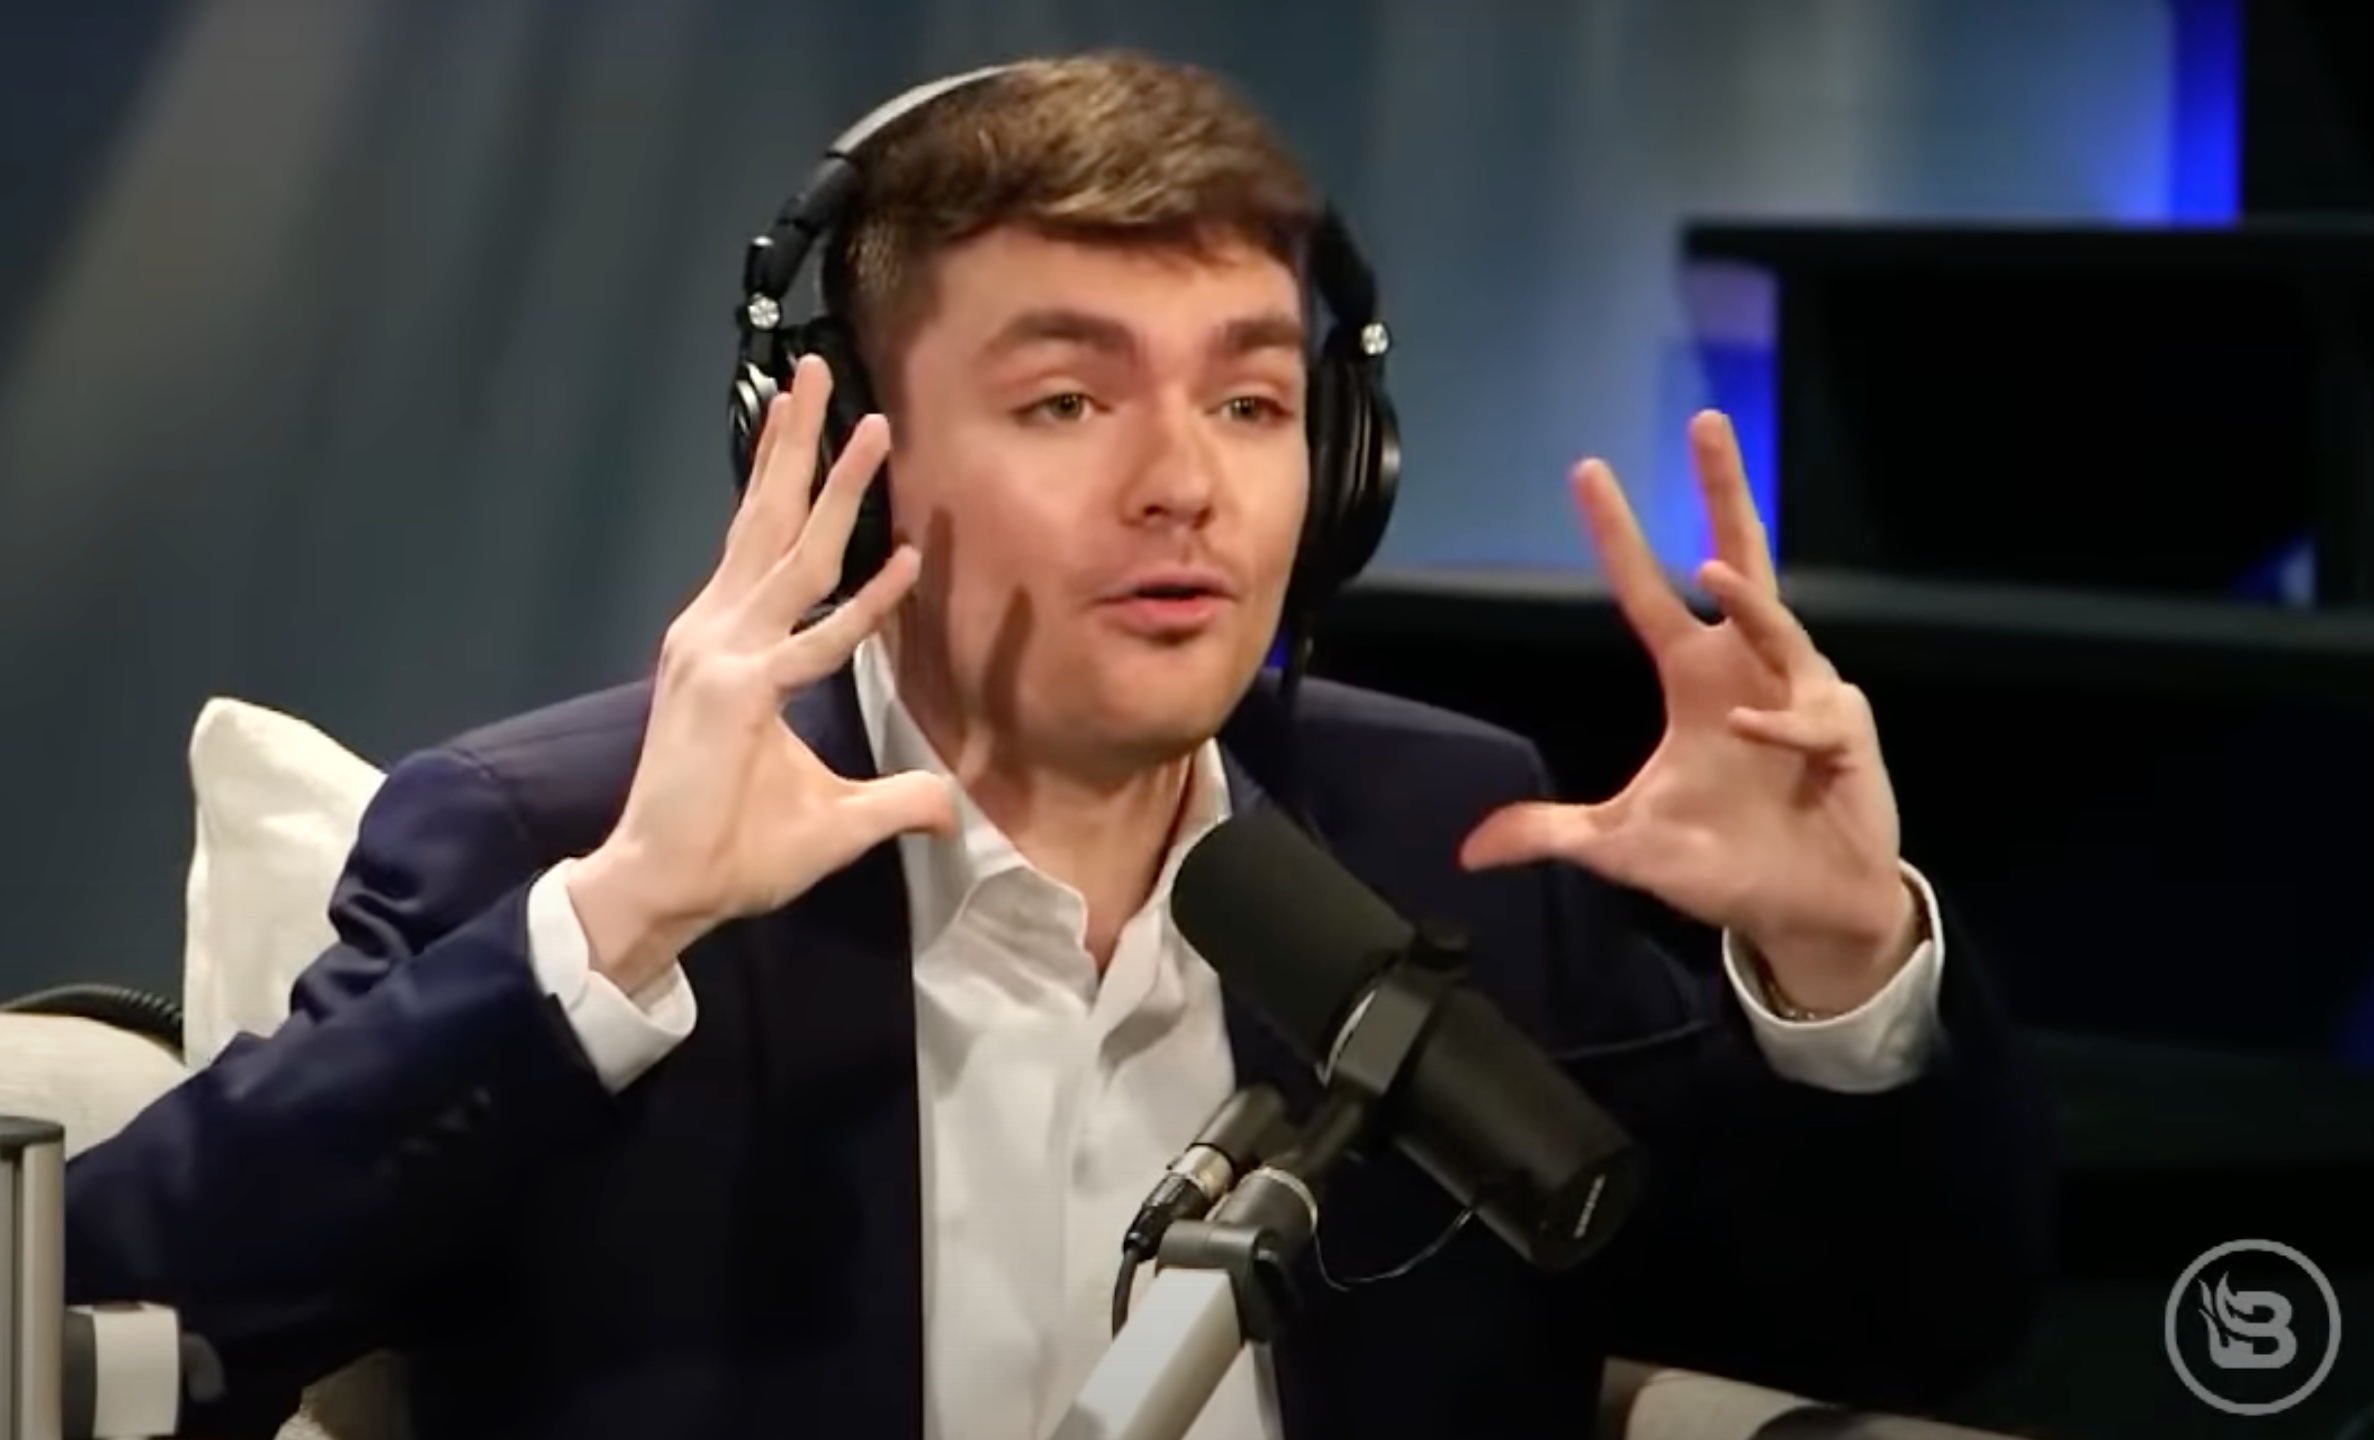 The Blaze Interviews White Supremacist and Anti-Semite Nick Fuentes, Asks If He’s Ever Been With a Woman